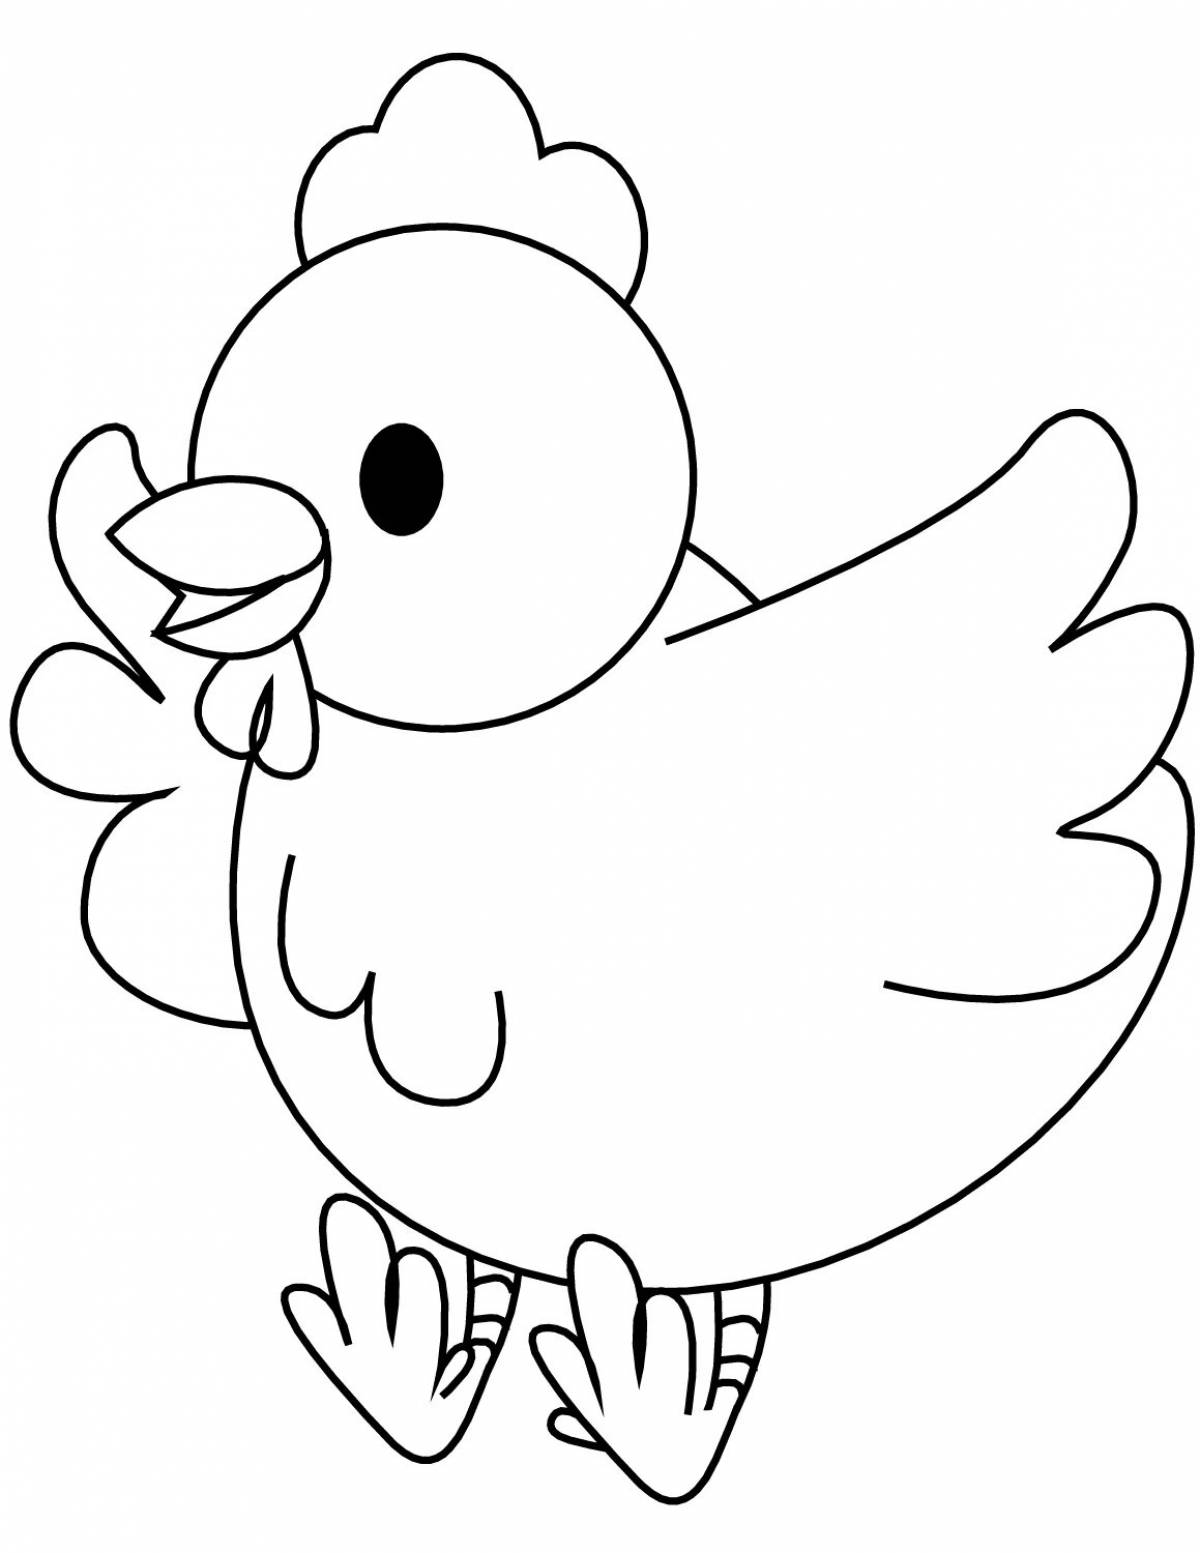 Cute baby chick coloring pages